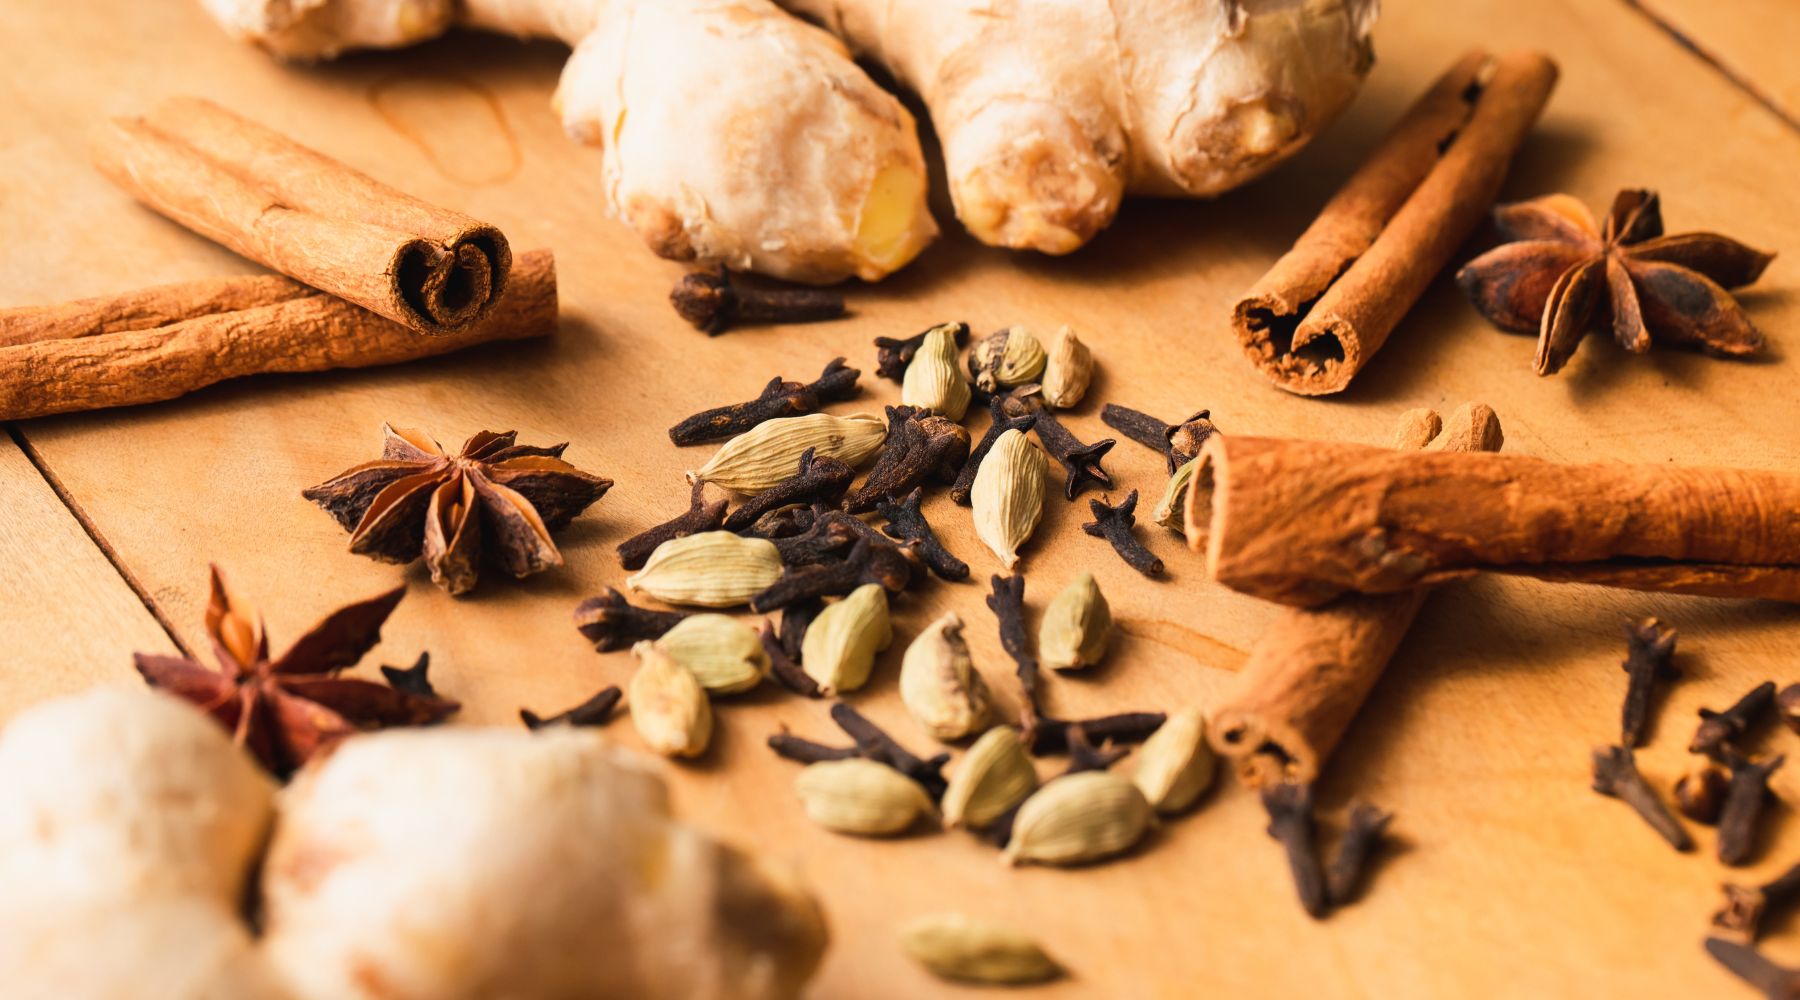 Collombatti Naturals 8 reasons to love chai this winter blog - chai spices, giver, cloves, star anise, cinnamon and cardamom scattered all over a wooden background